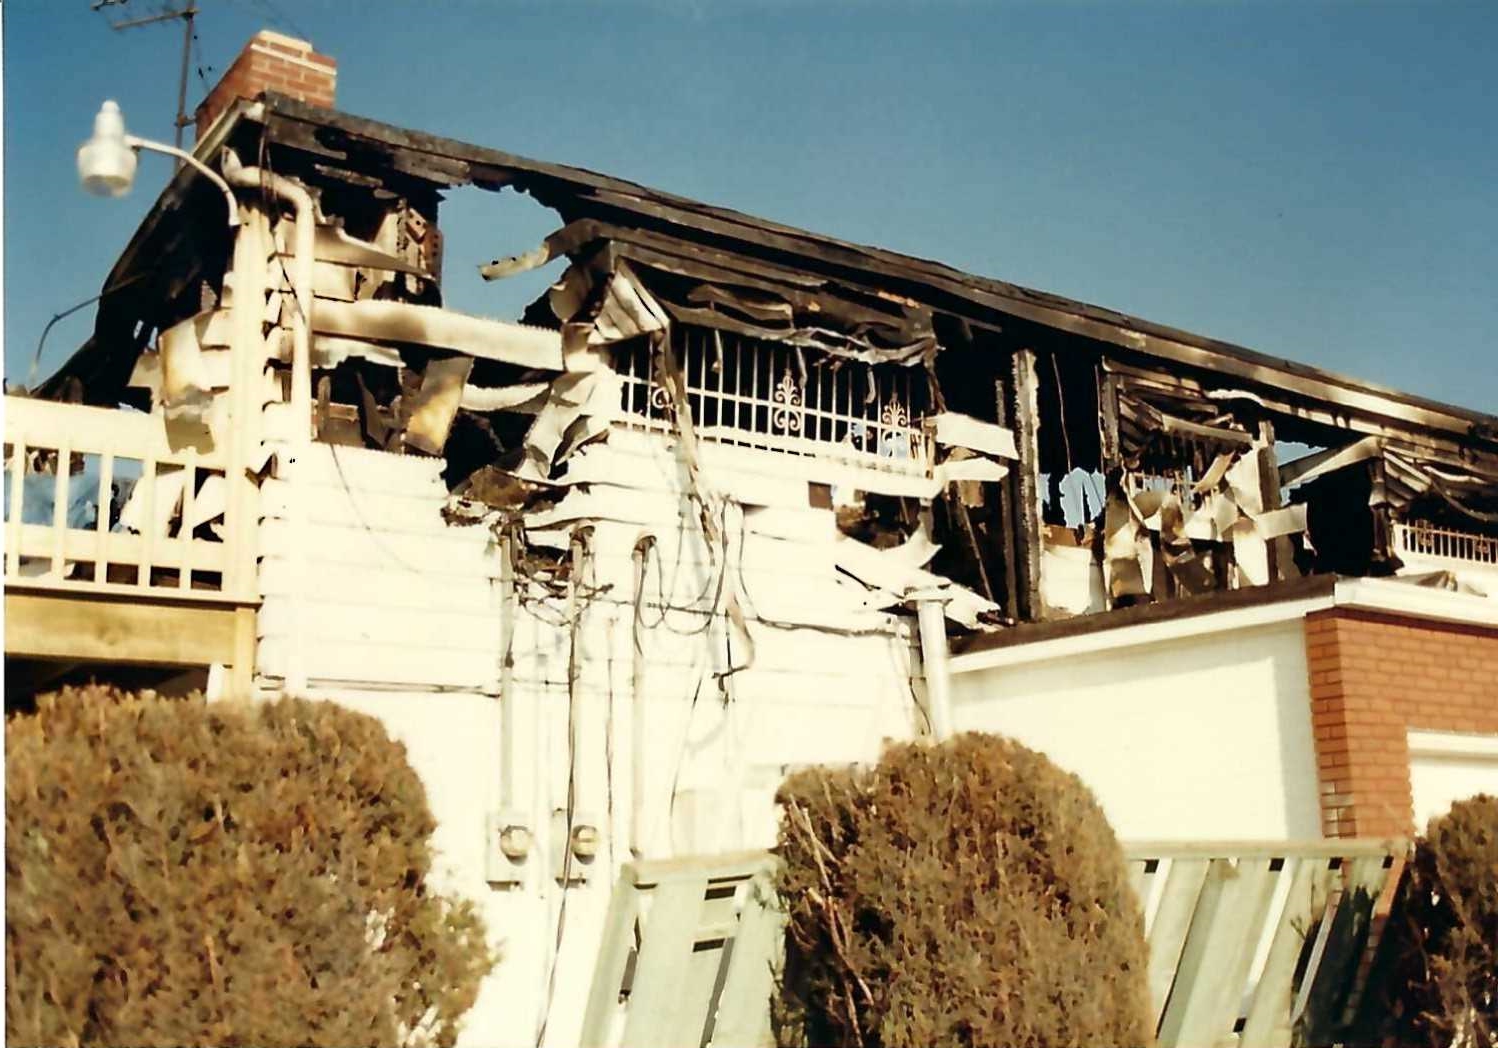 Officer Funeral Home - Fire Damage Photo 1